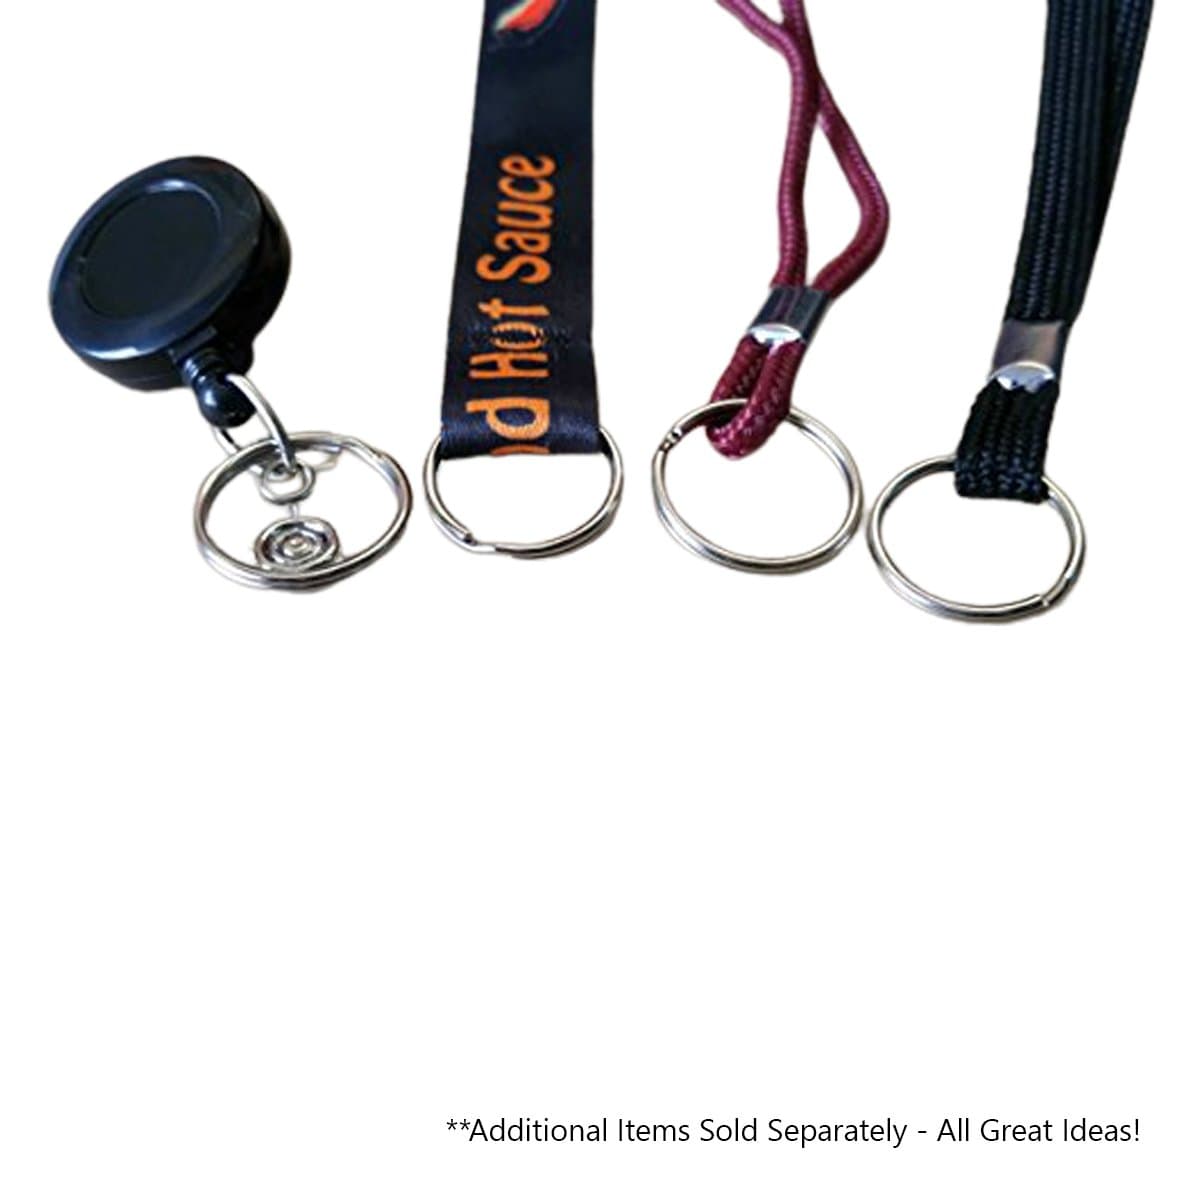 Wholesale Keychains: Buy Bulk Keychain Accessories at Competitive Prices